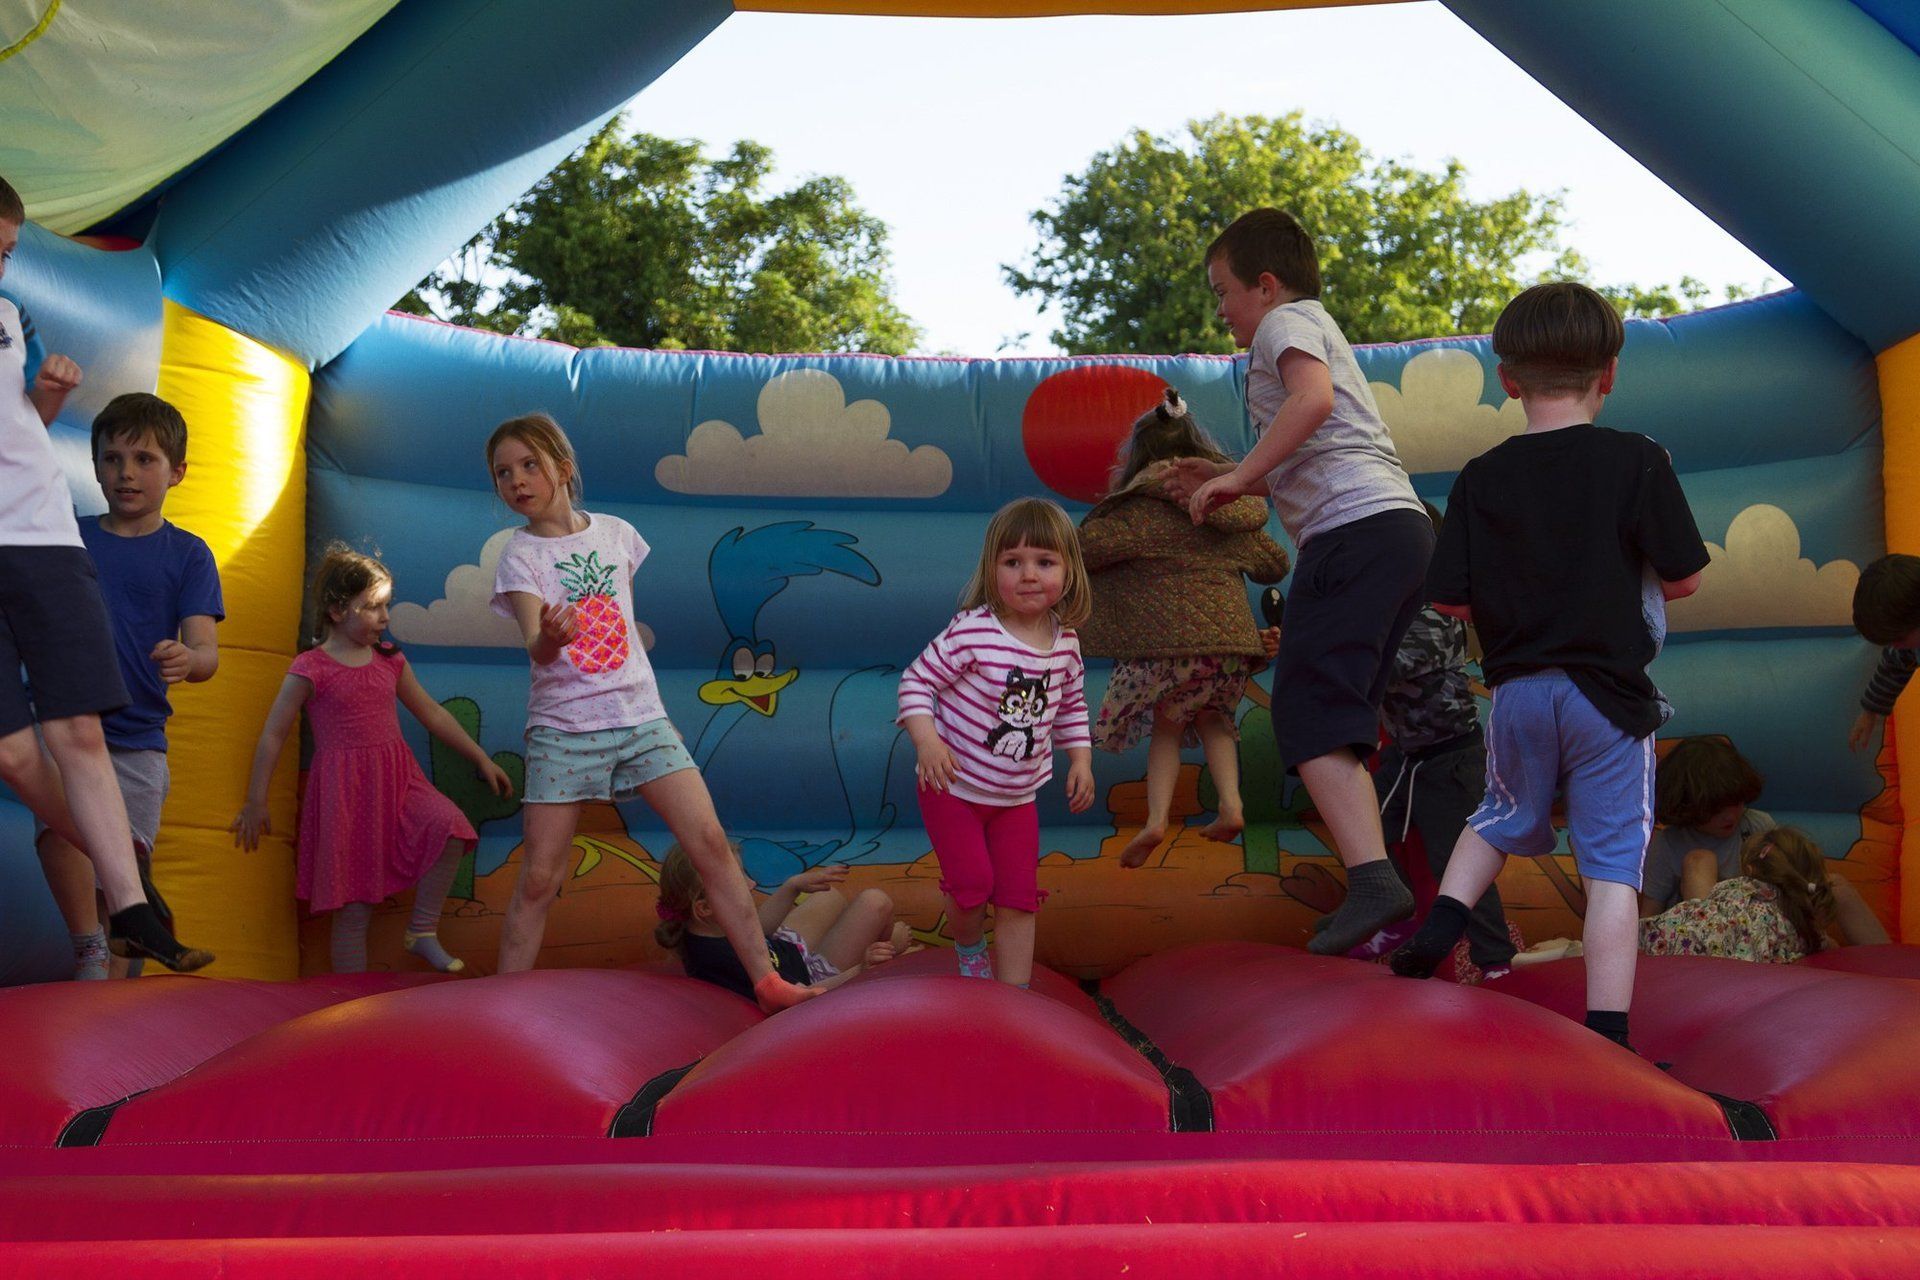 A group of children are playing in a bouncy house.